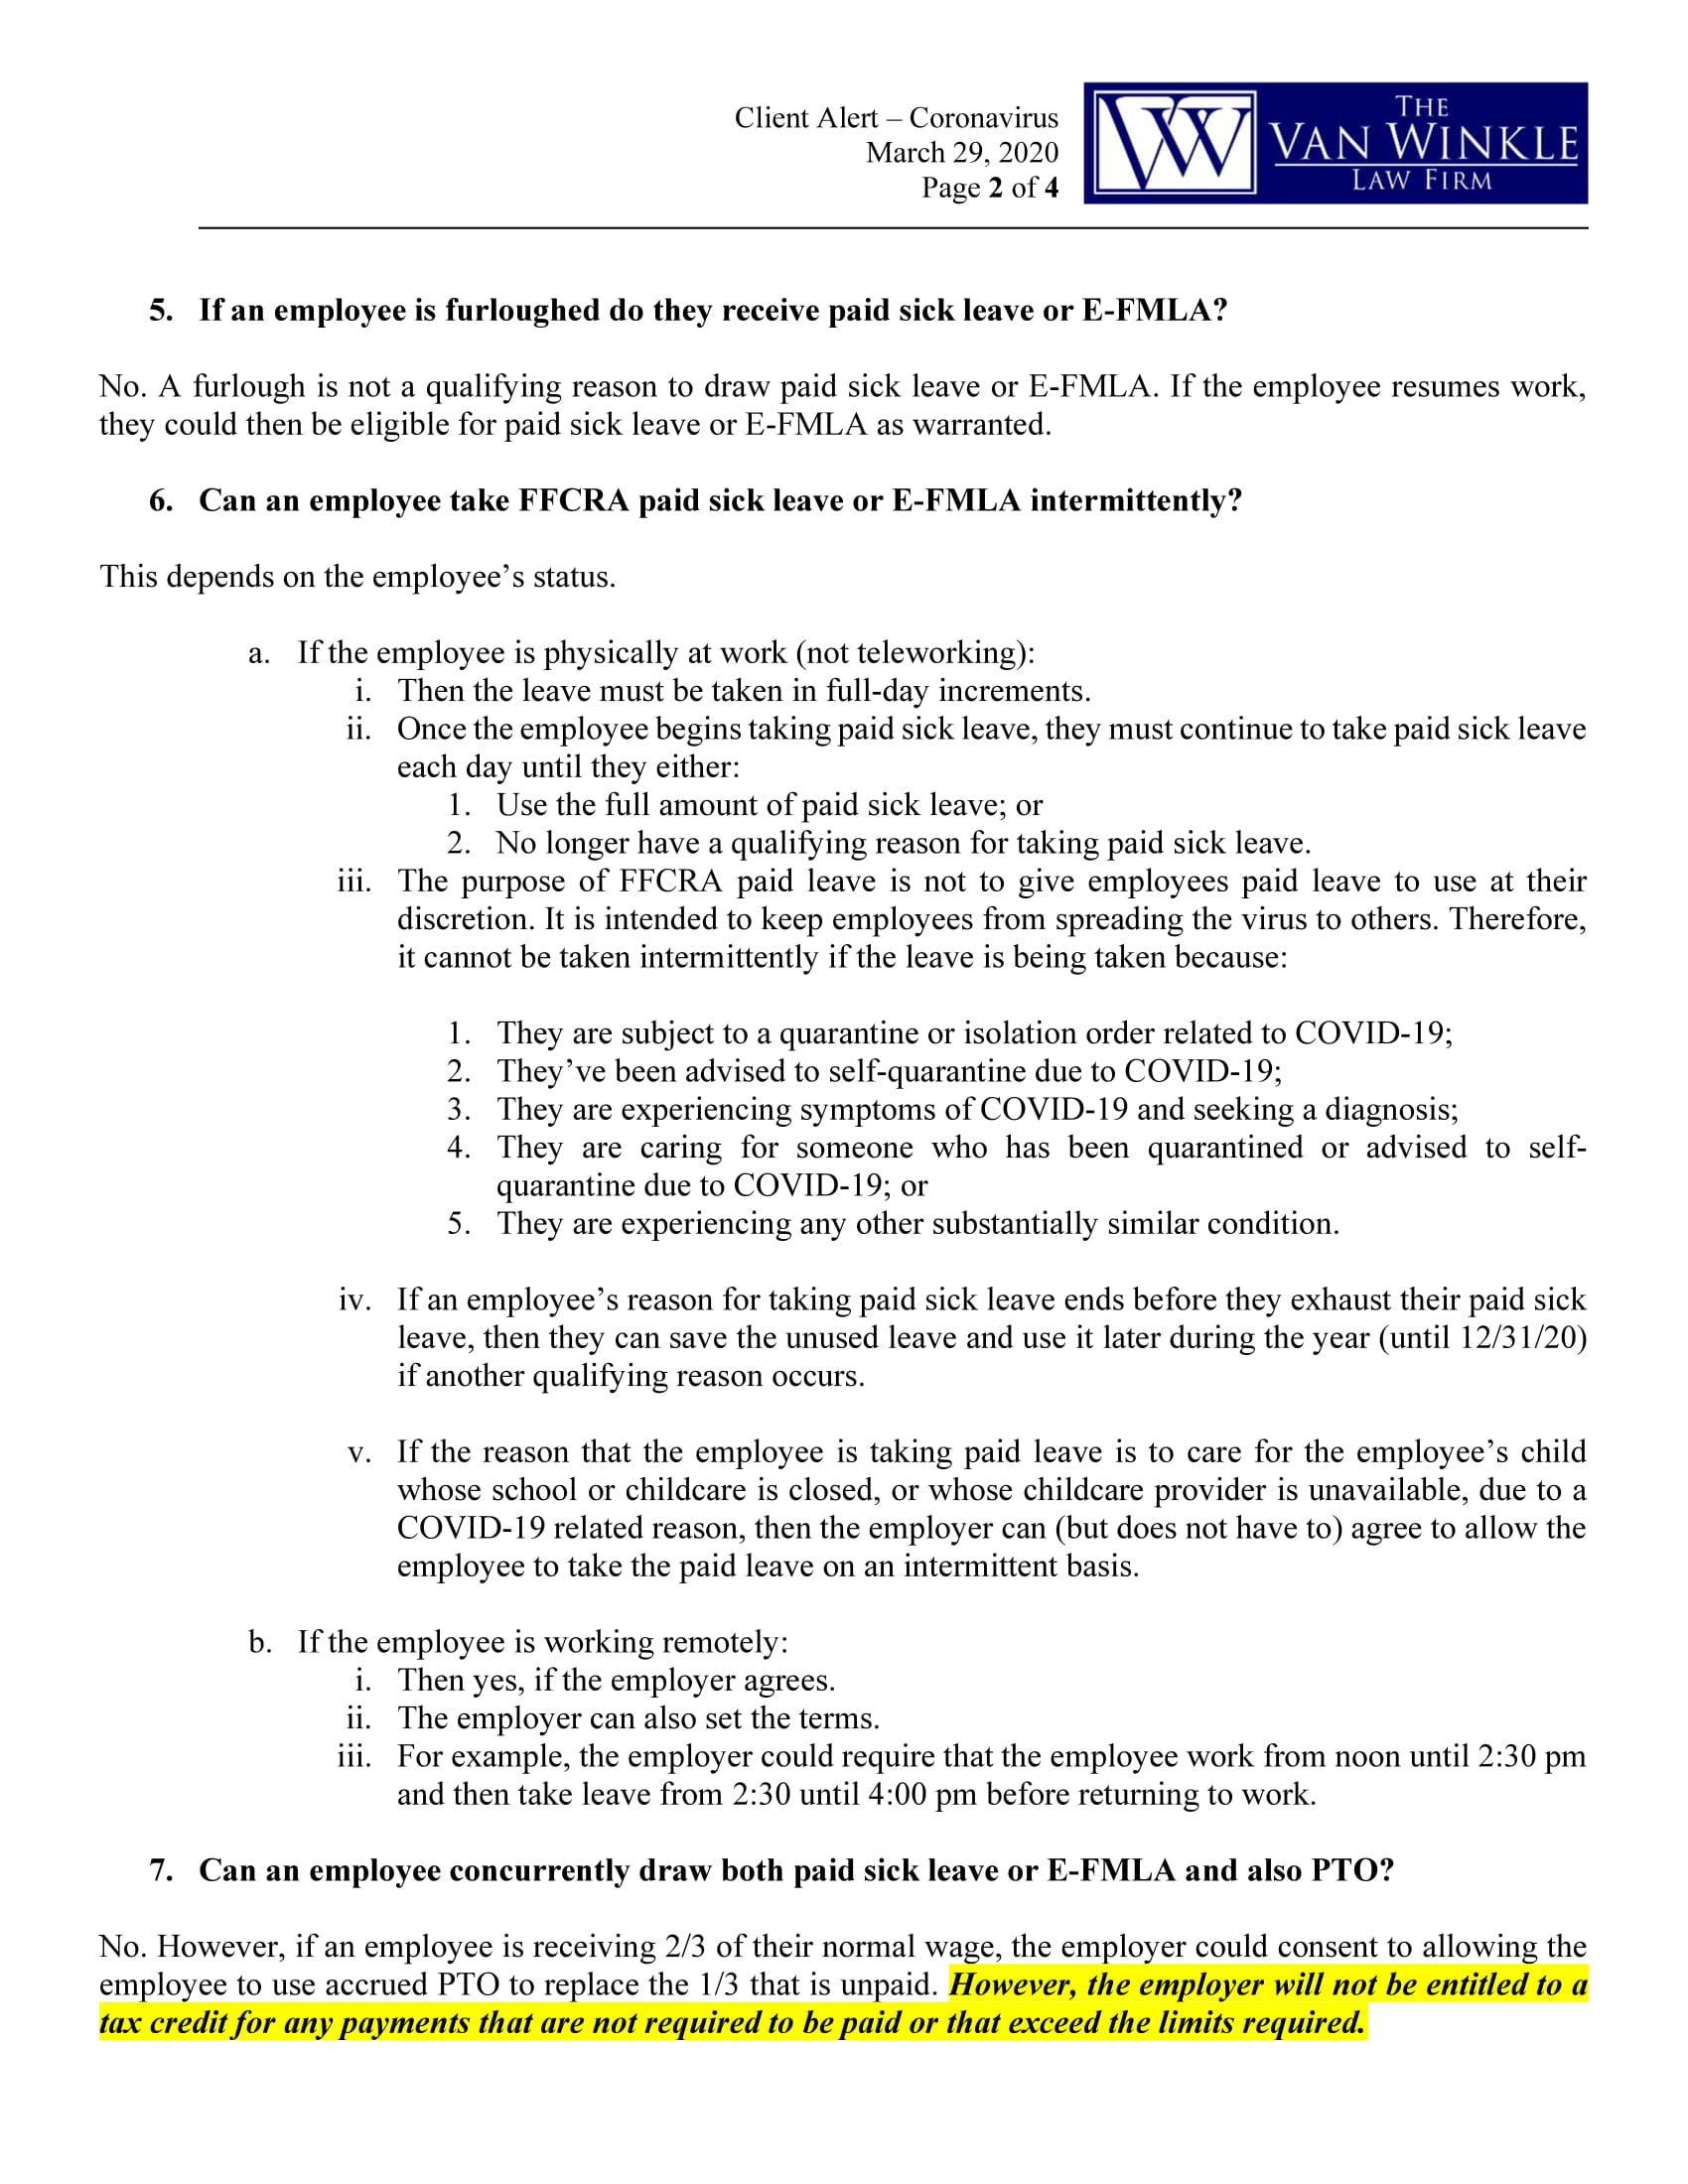 Additional DOL Clarifications Page 2